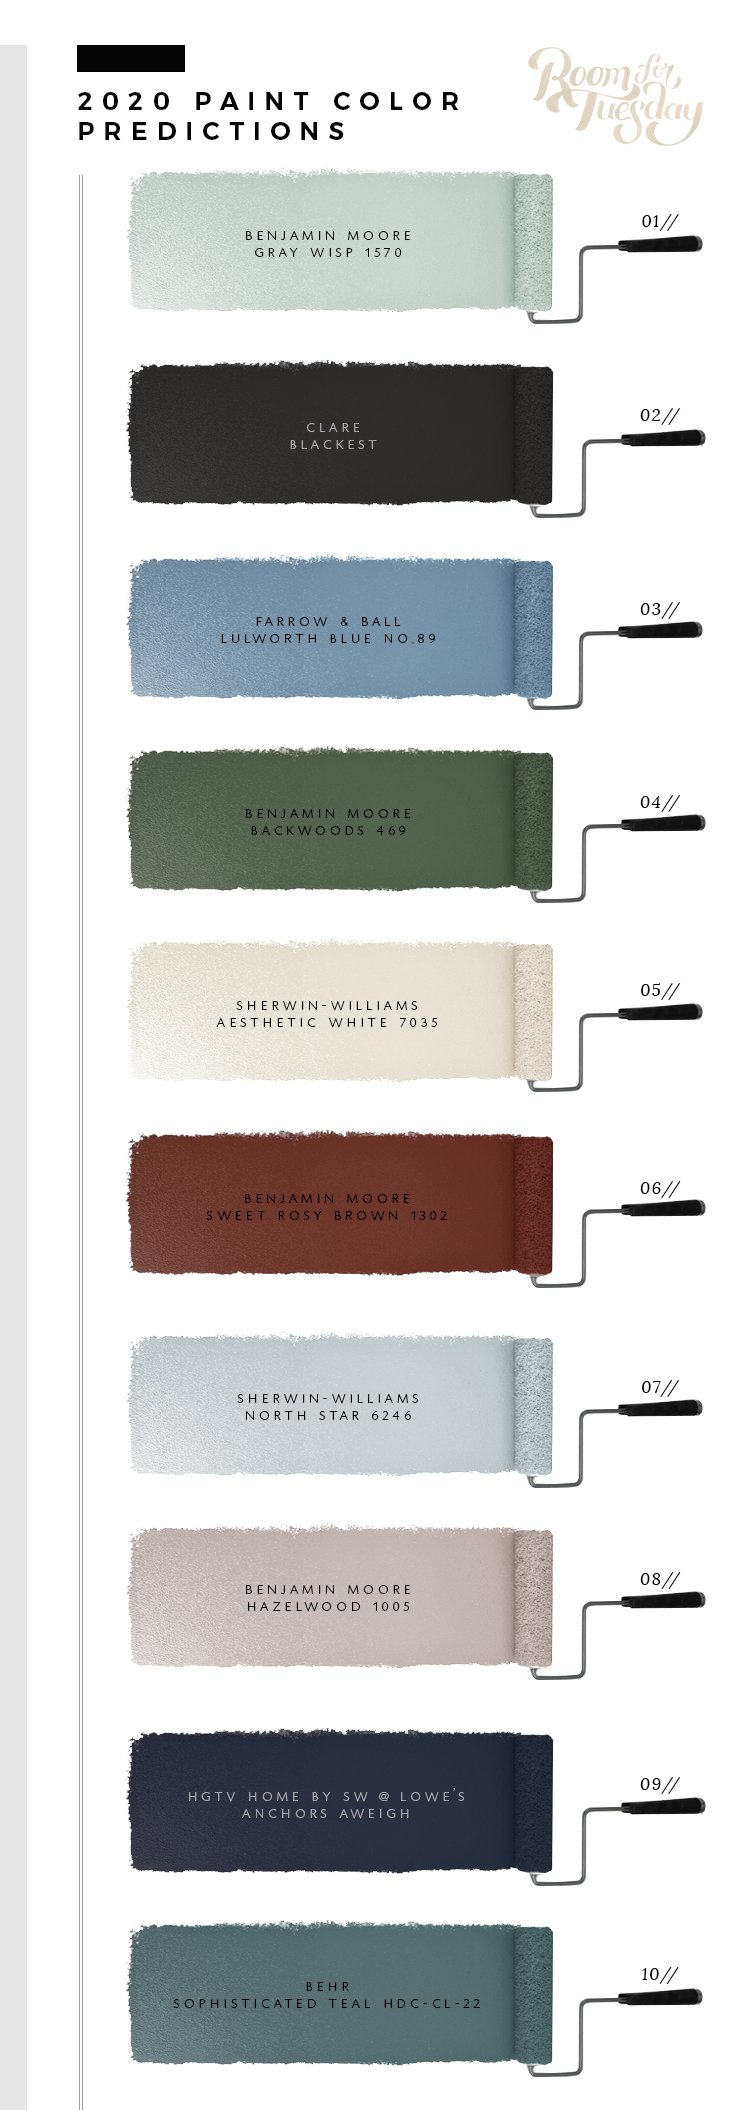 Predicted Paint Colors For 2020 - roomfortuesday.com